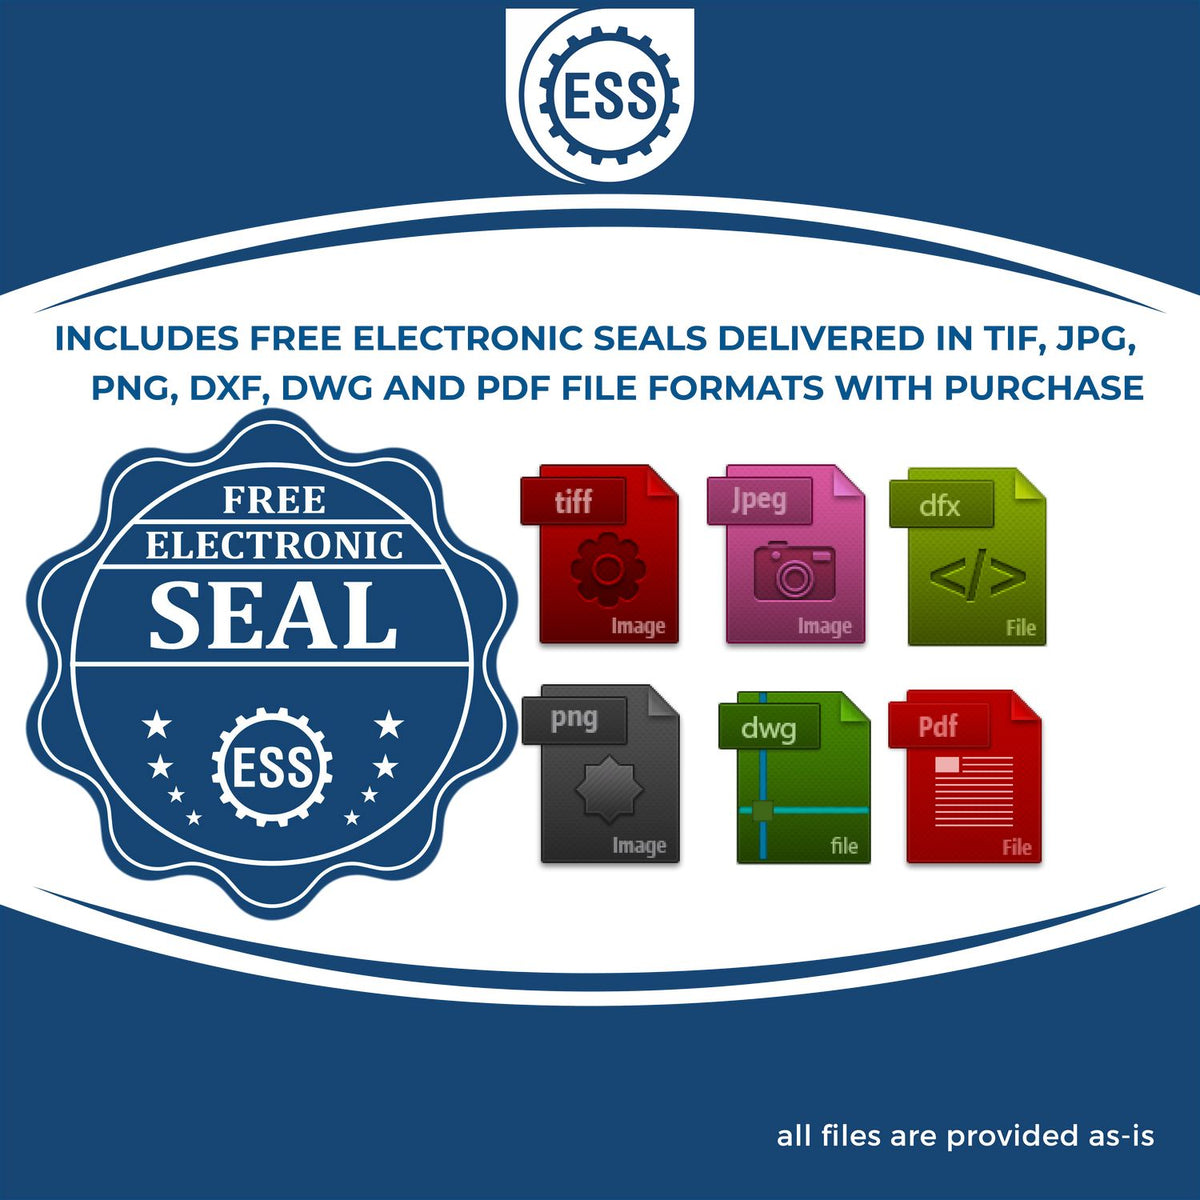 An infographic for the free electronic seal for the Hybrid Florida Land Surveyor Seal illustrating the different file type icons such as DXF, DWG, TIF, JPG and PNG.